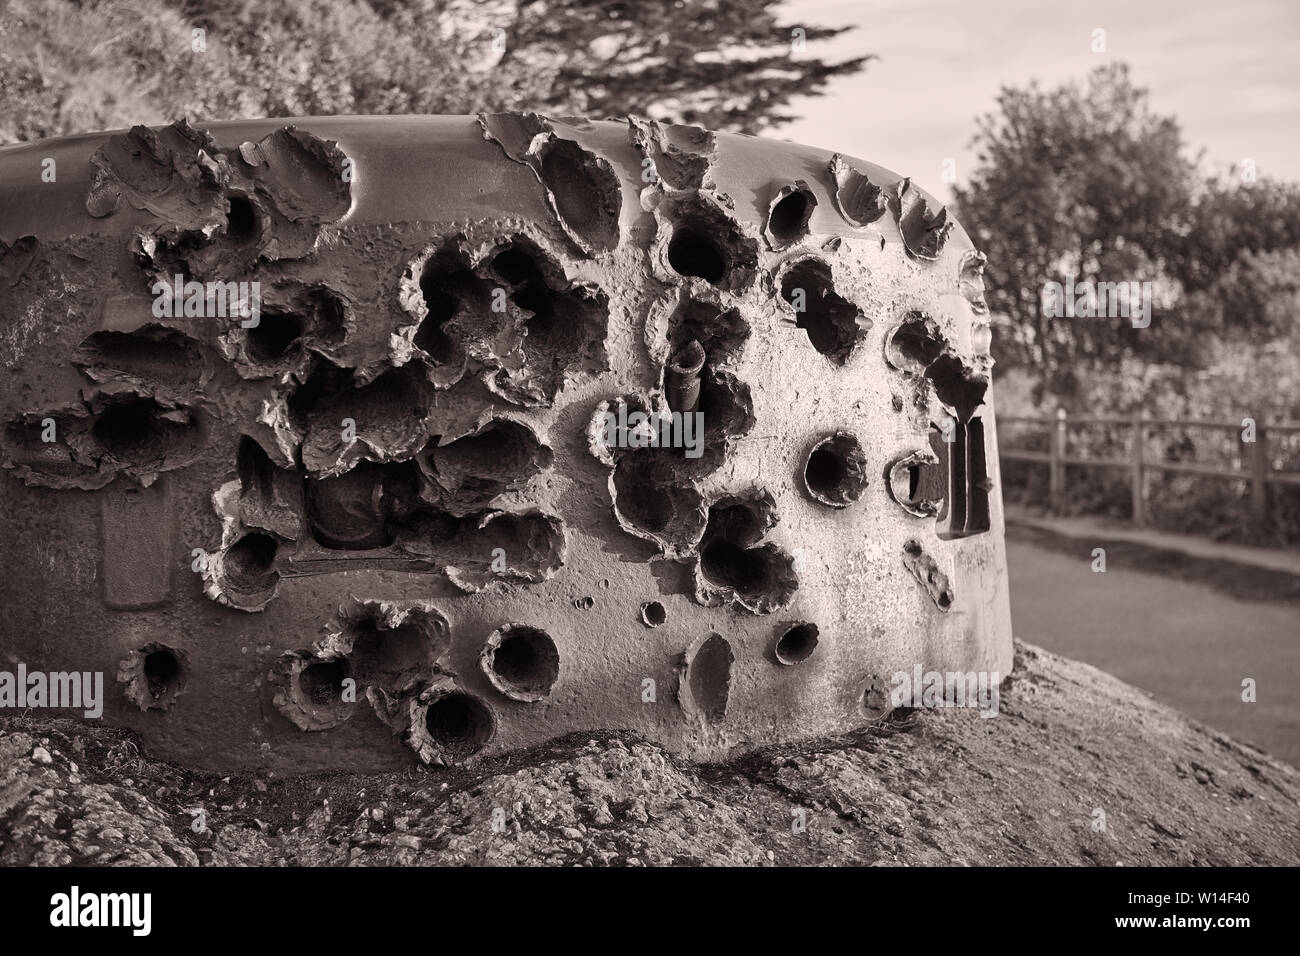 Image of WW2 gun implacement which has been heavely shot at whith shells. Stock Photo